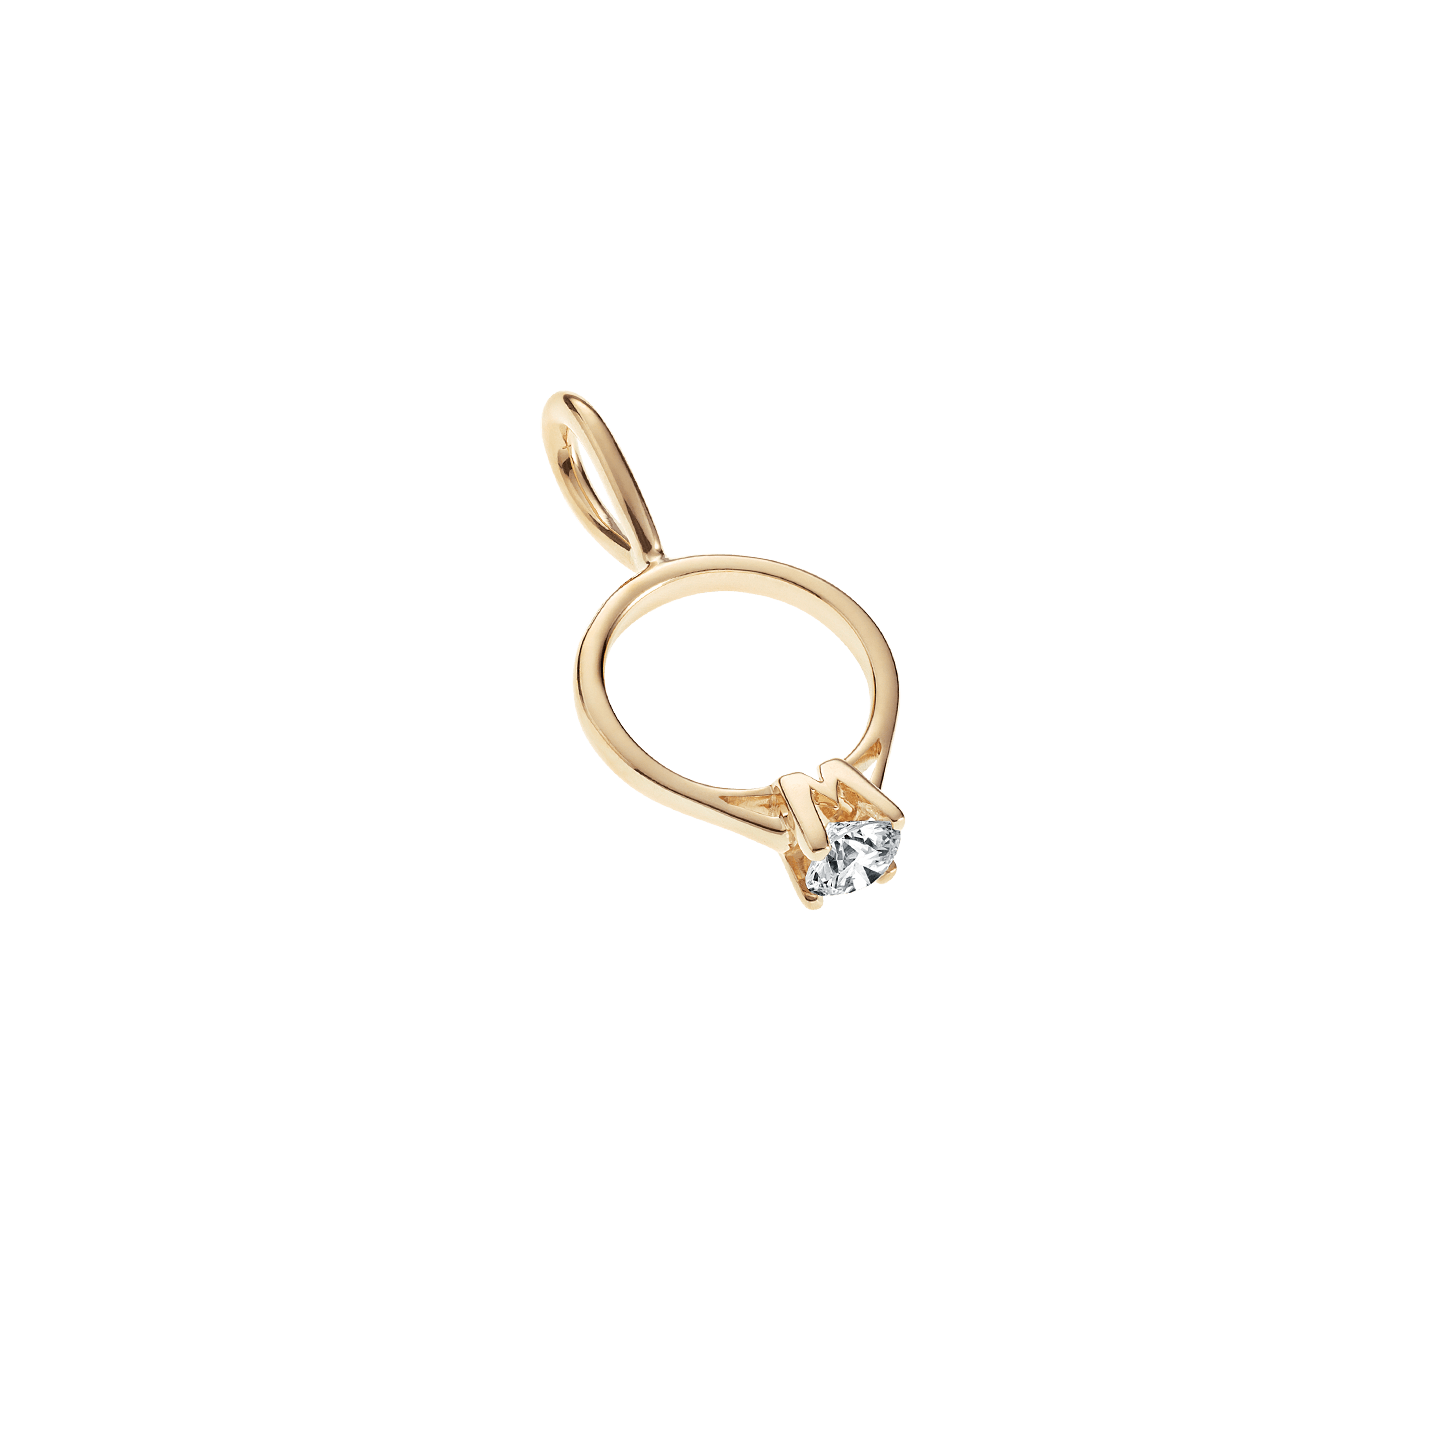 Engagement Ring Charm in Yellow Gold, Product Image 4